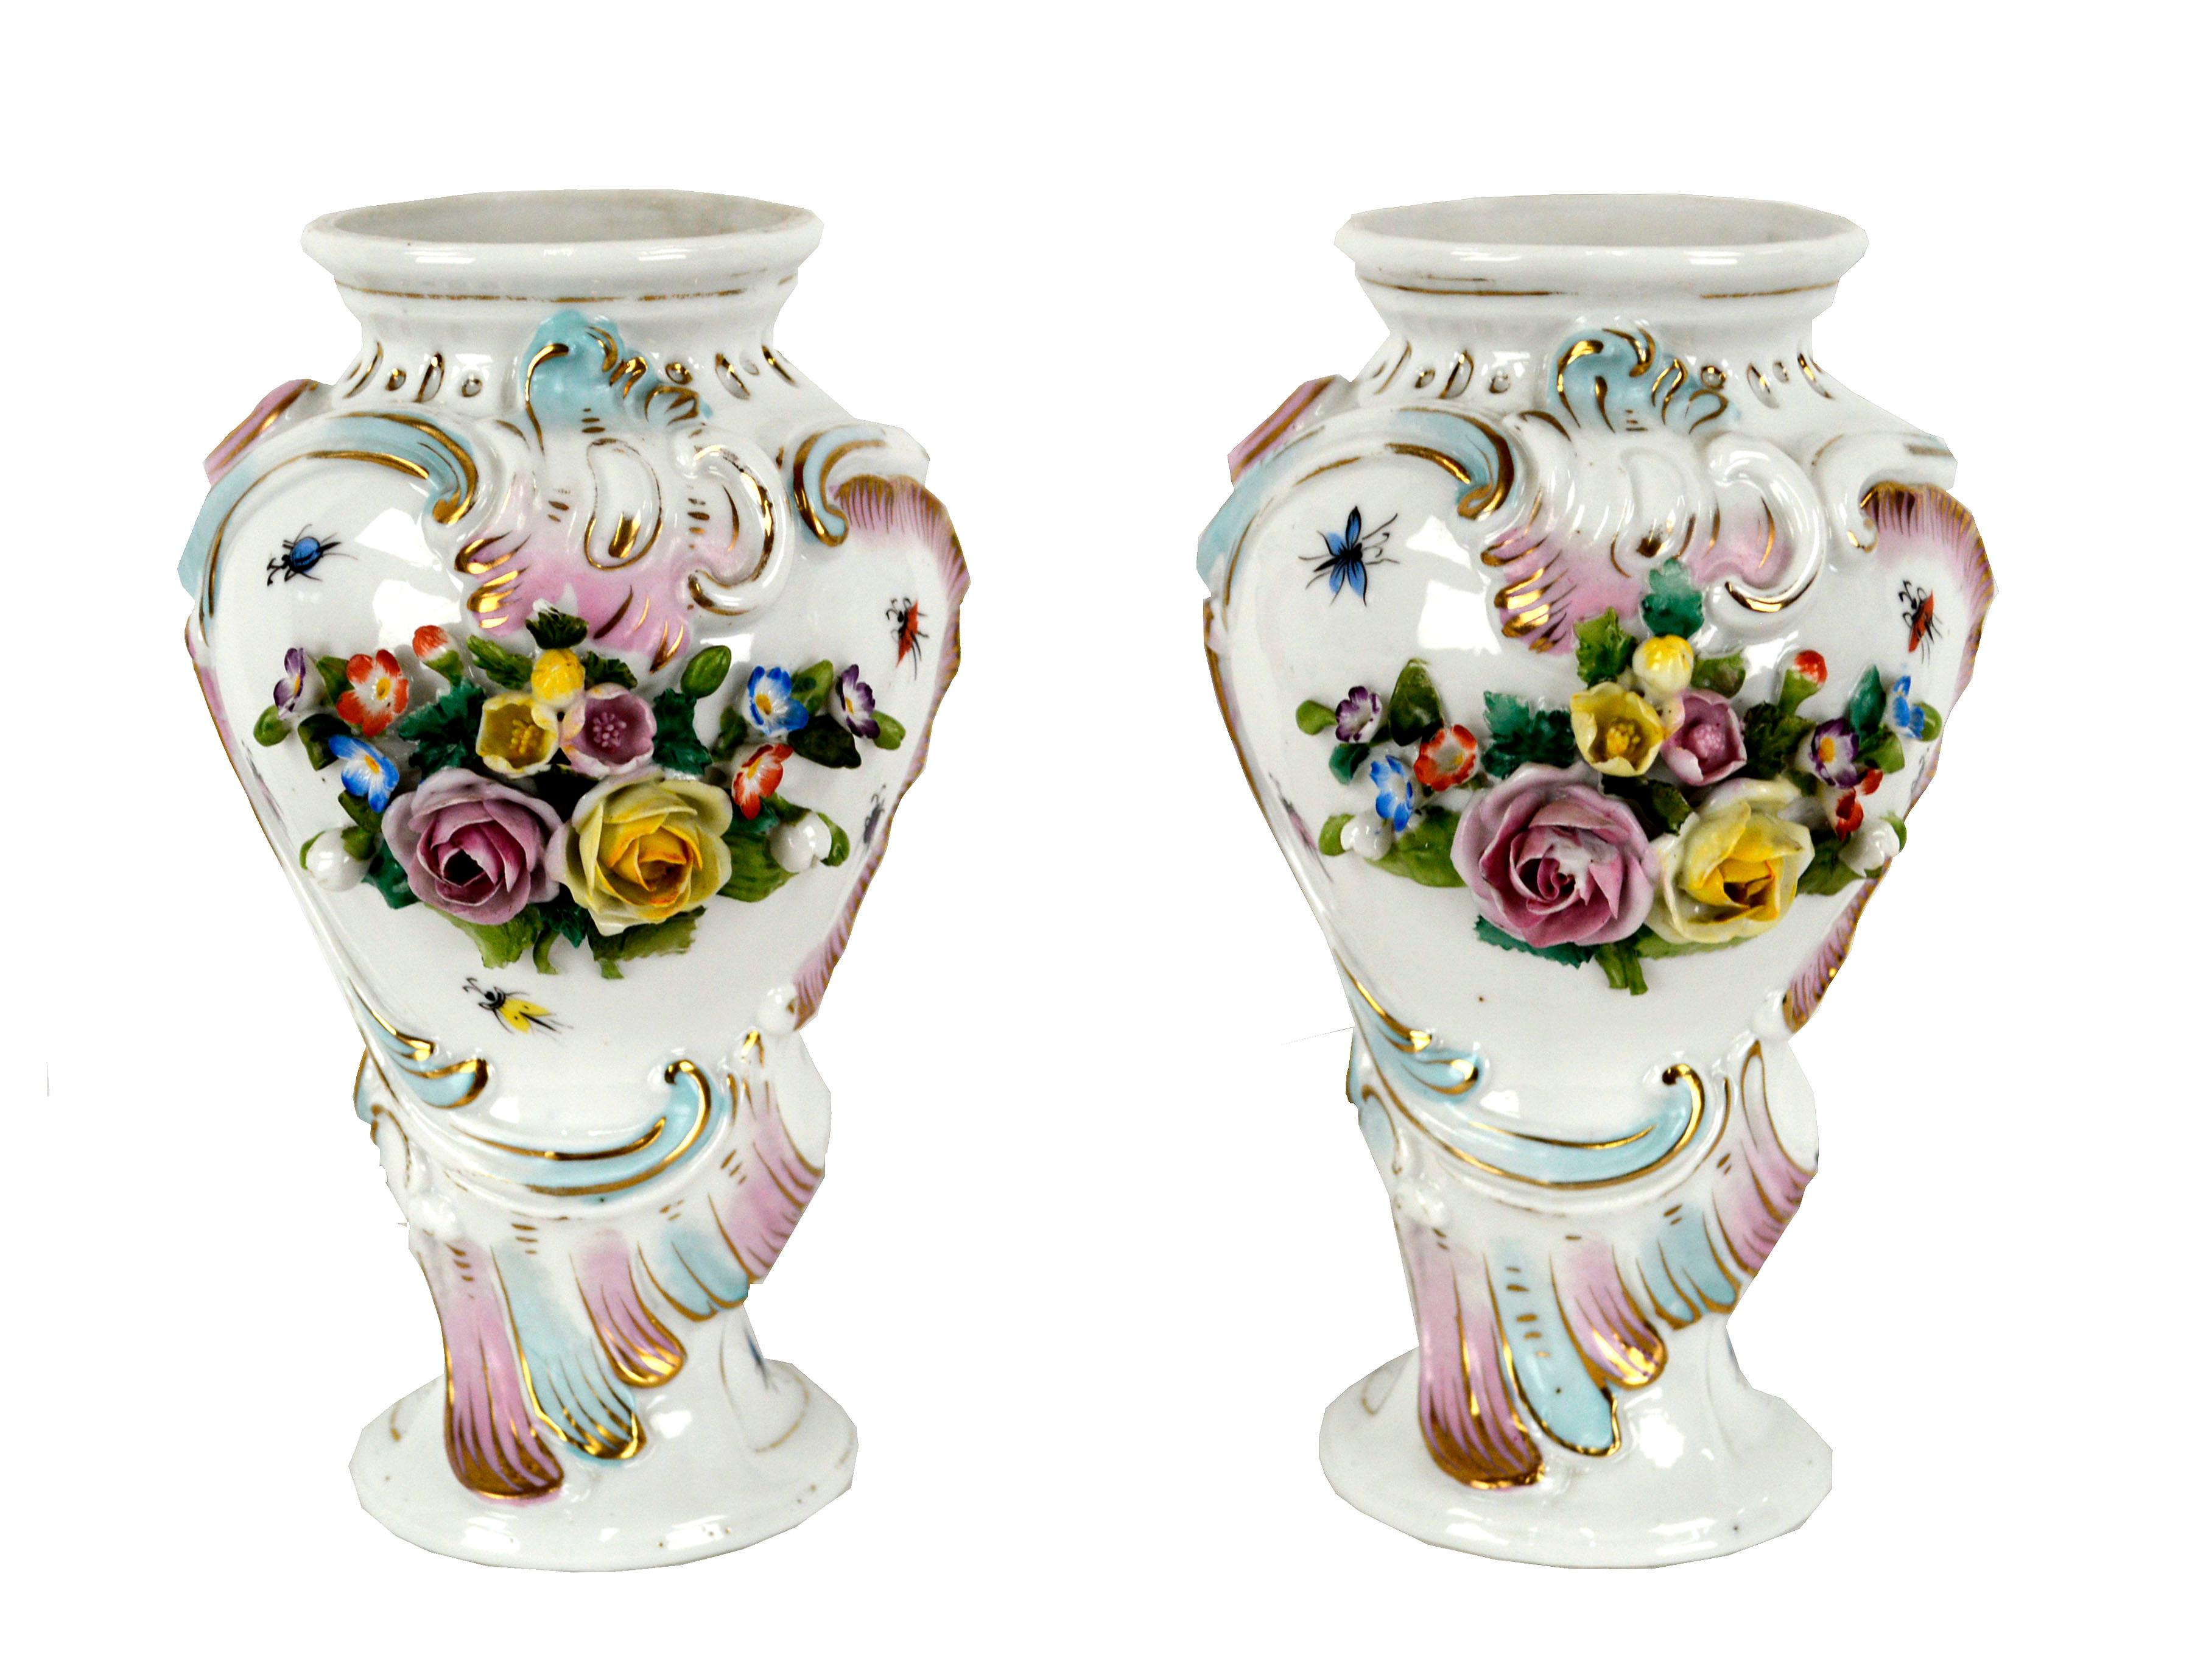 Pair of exquisite 19th century Royal Vienna porcelain vases. A fine example of the Neo-Classical Austrian style, these vases are decorated with an ornate garden floral motif. Encrusted with sculptural bunches of pink and yellow roses, and painted